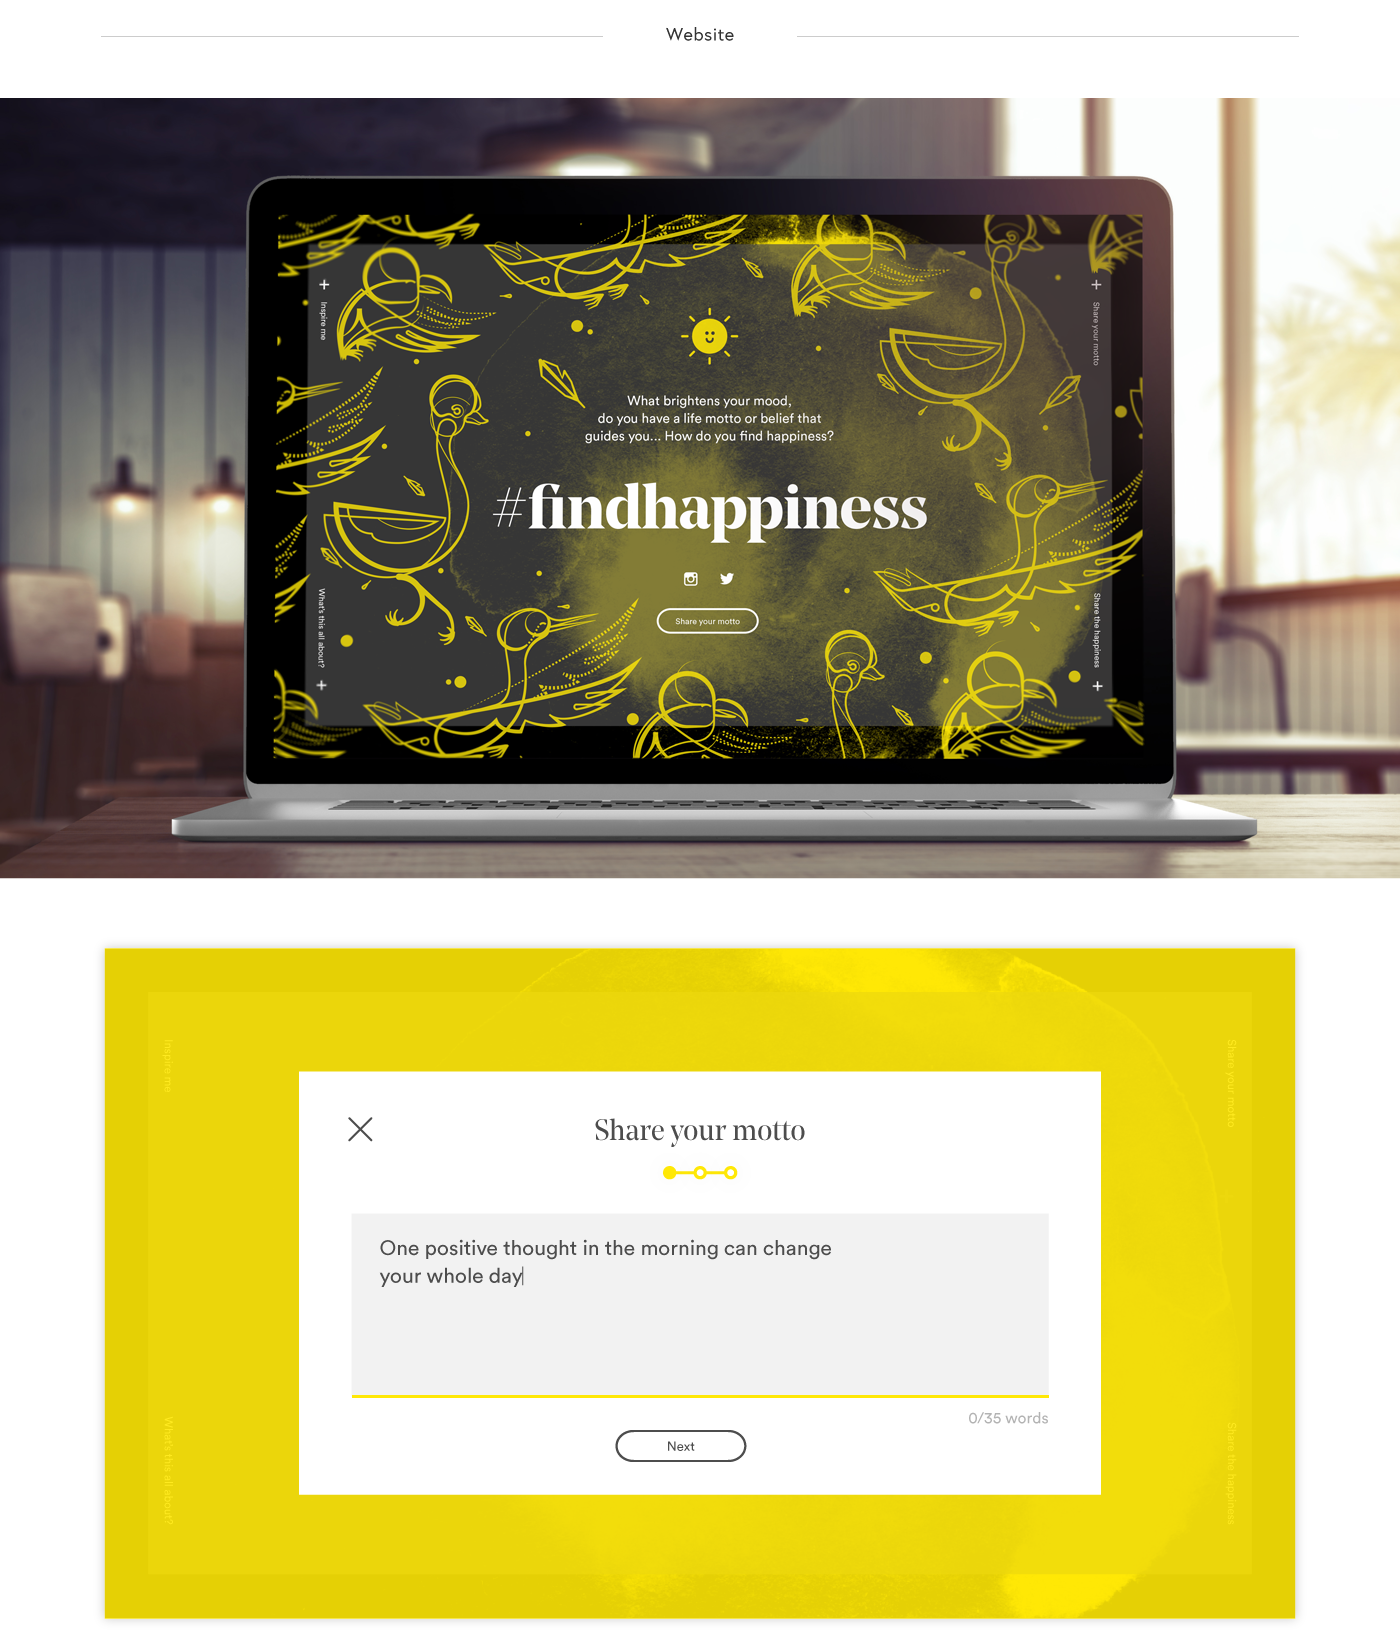 design happiness studies survey Form wellbeing social